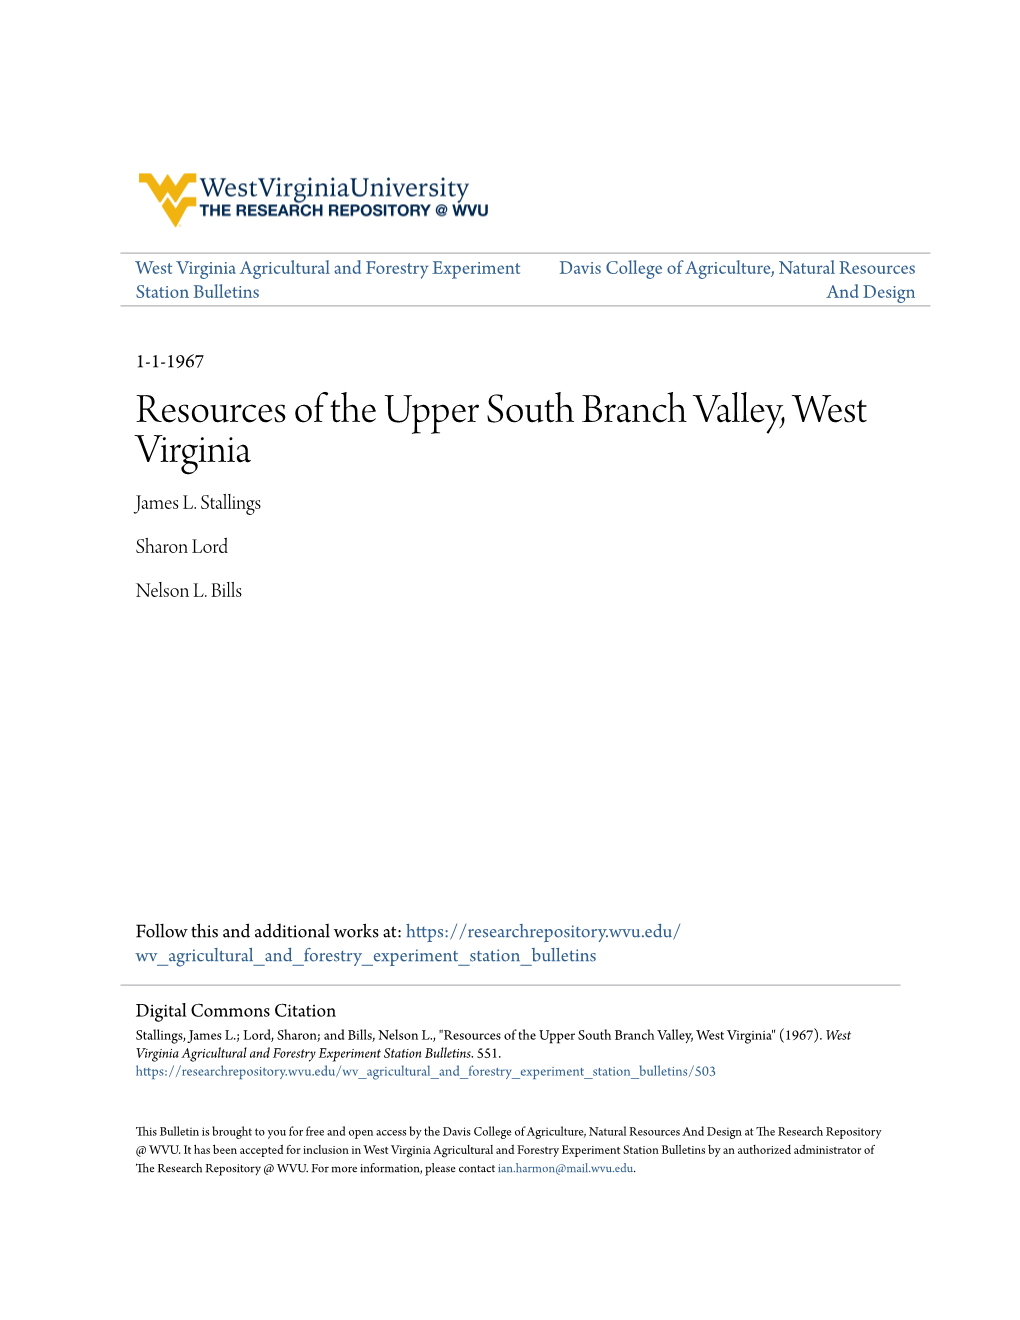 Resources of the Upper South Branch Valley, West Virginia James L